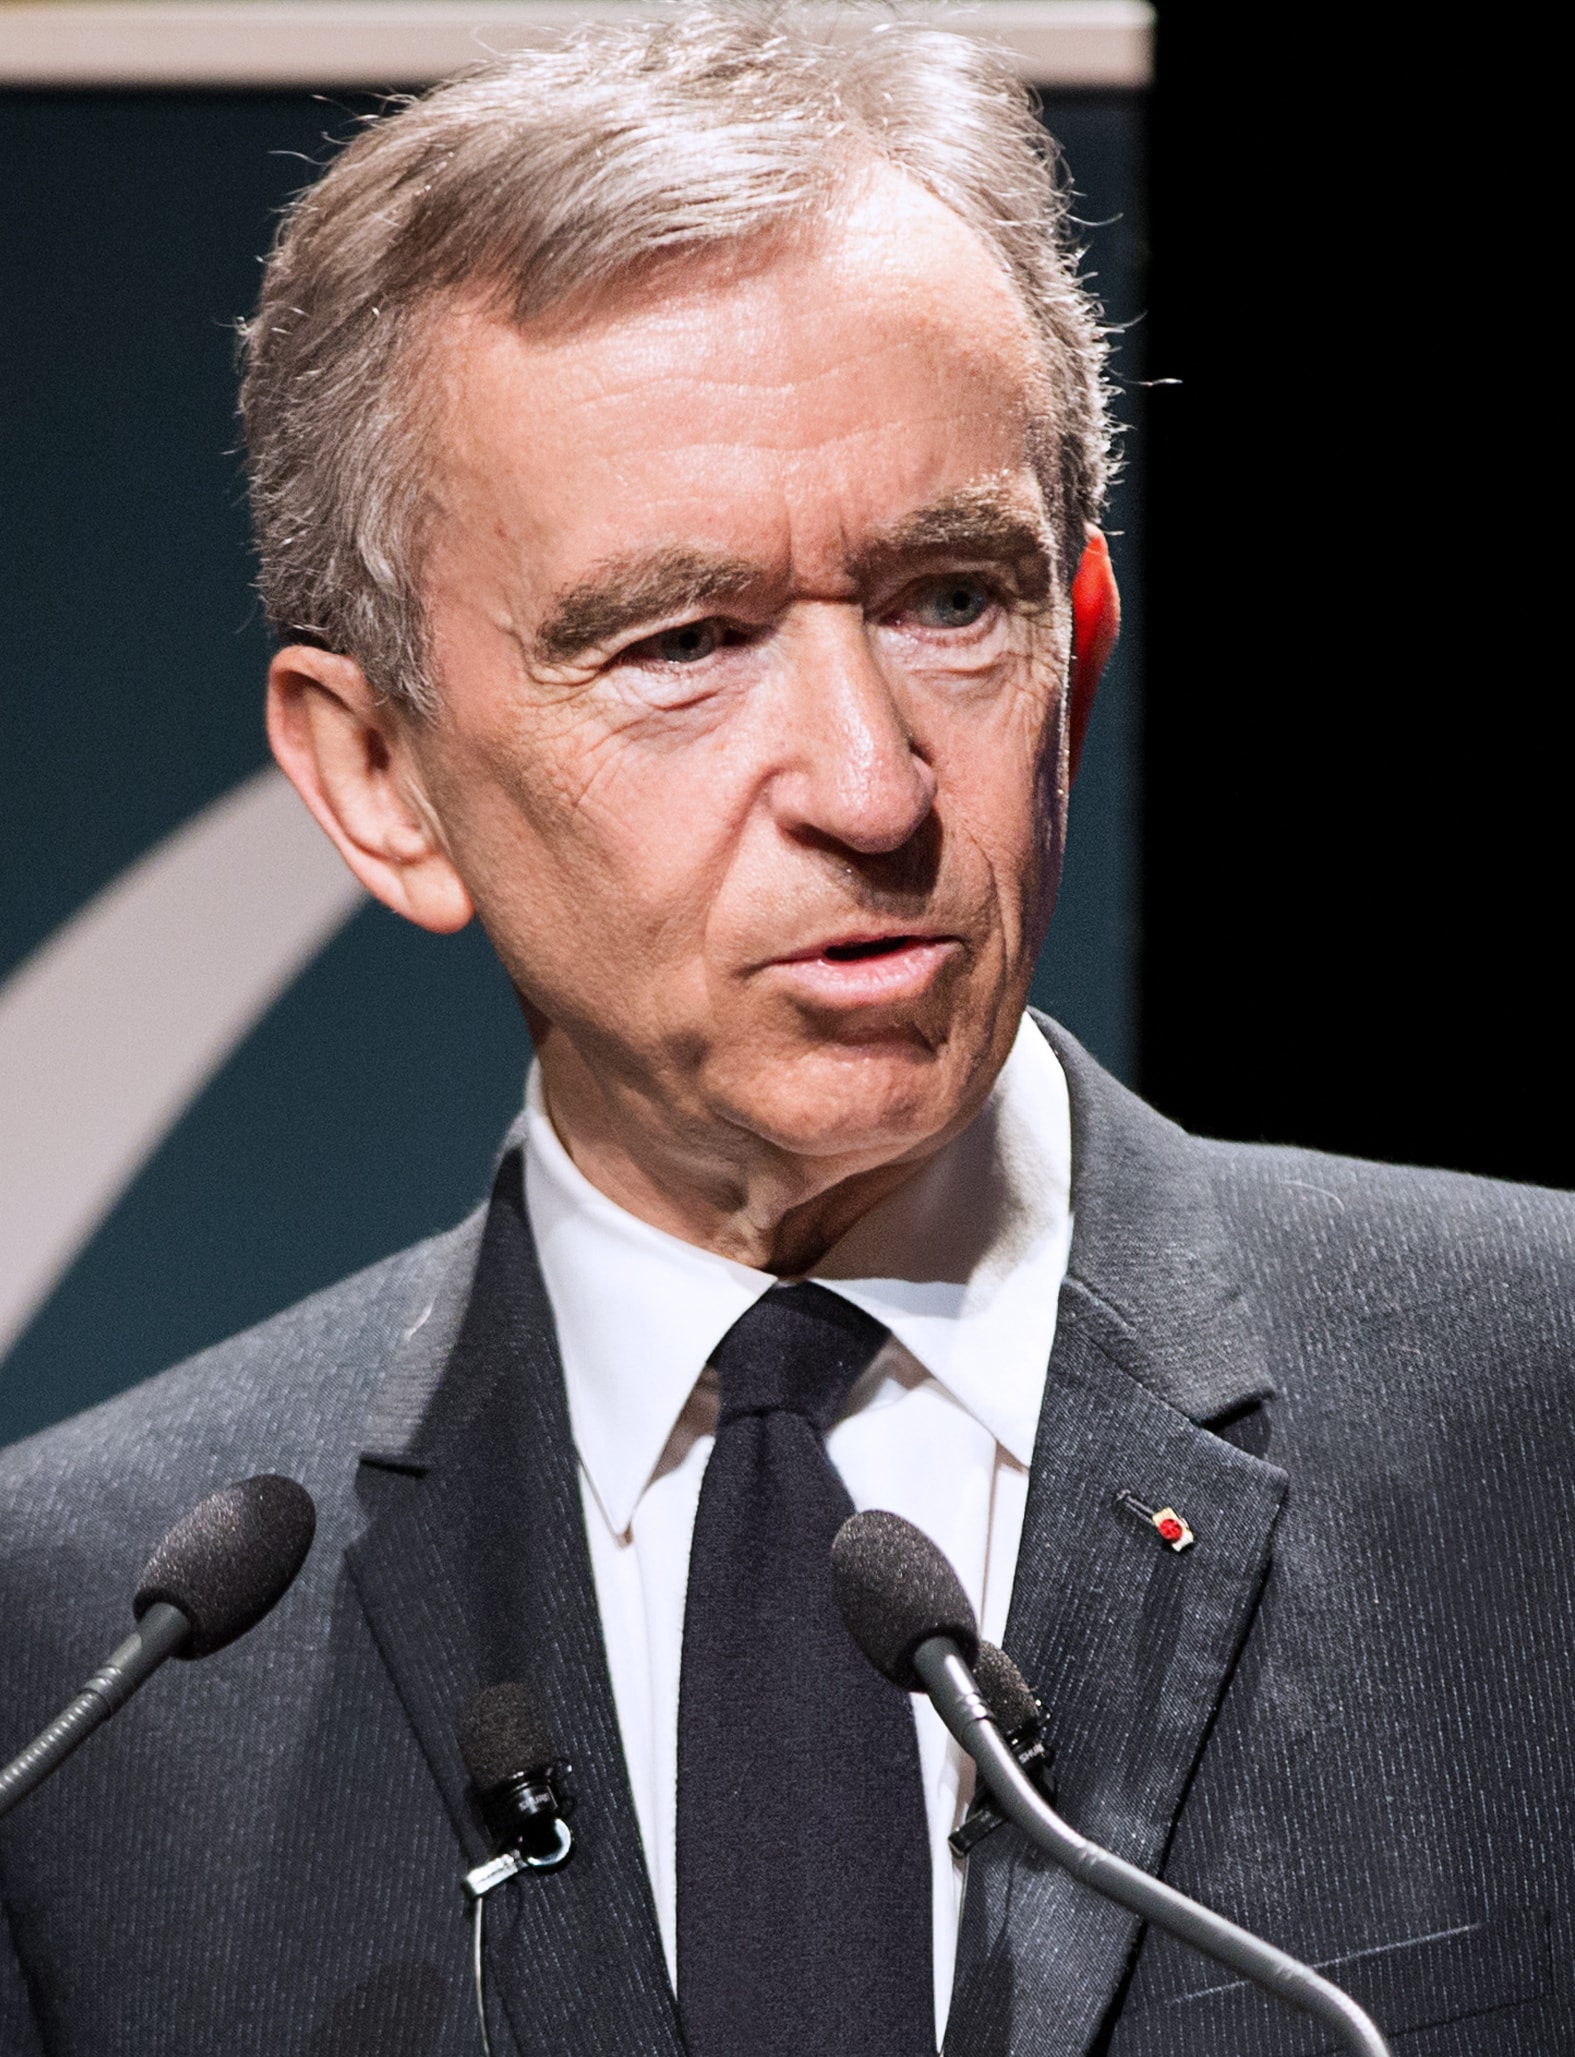 Louis Vuitton boss Bernard Arnault denies setting up a firm in Belgium to  invest in crypto